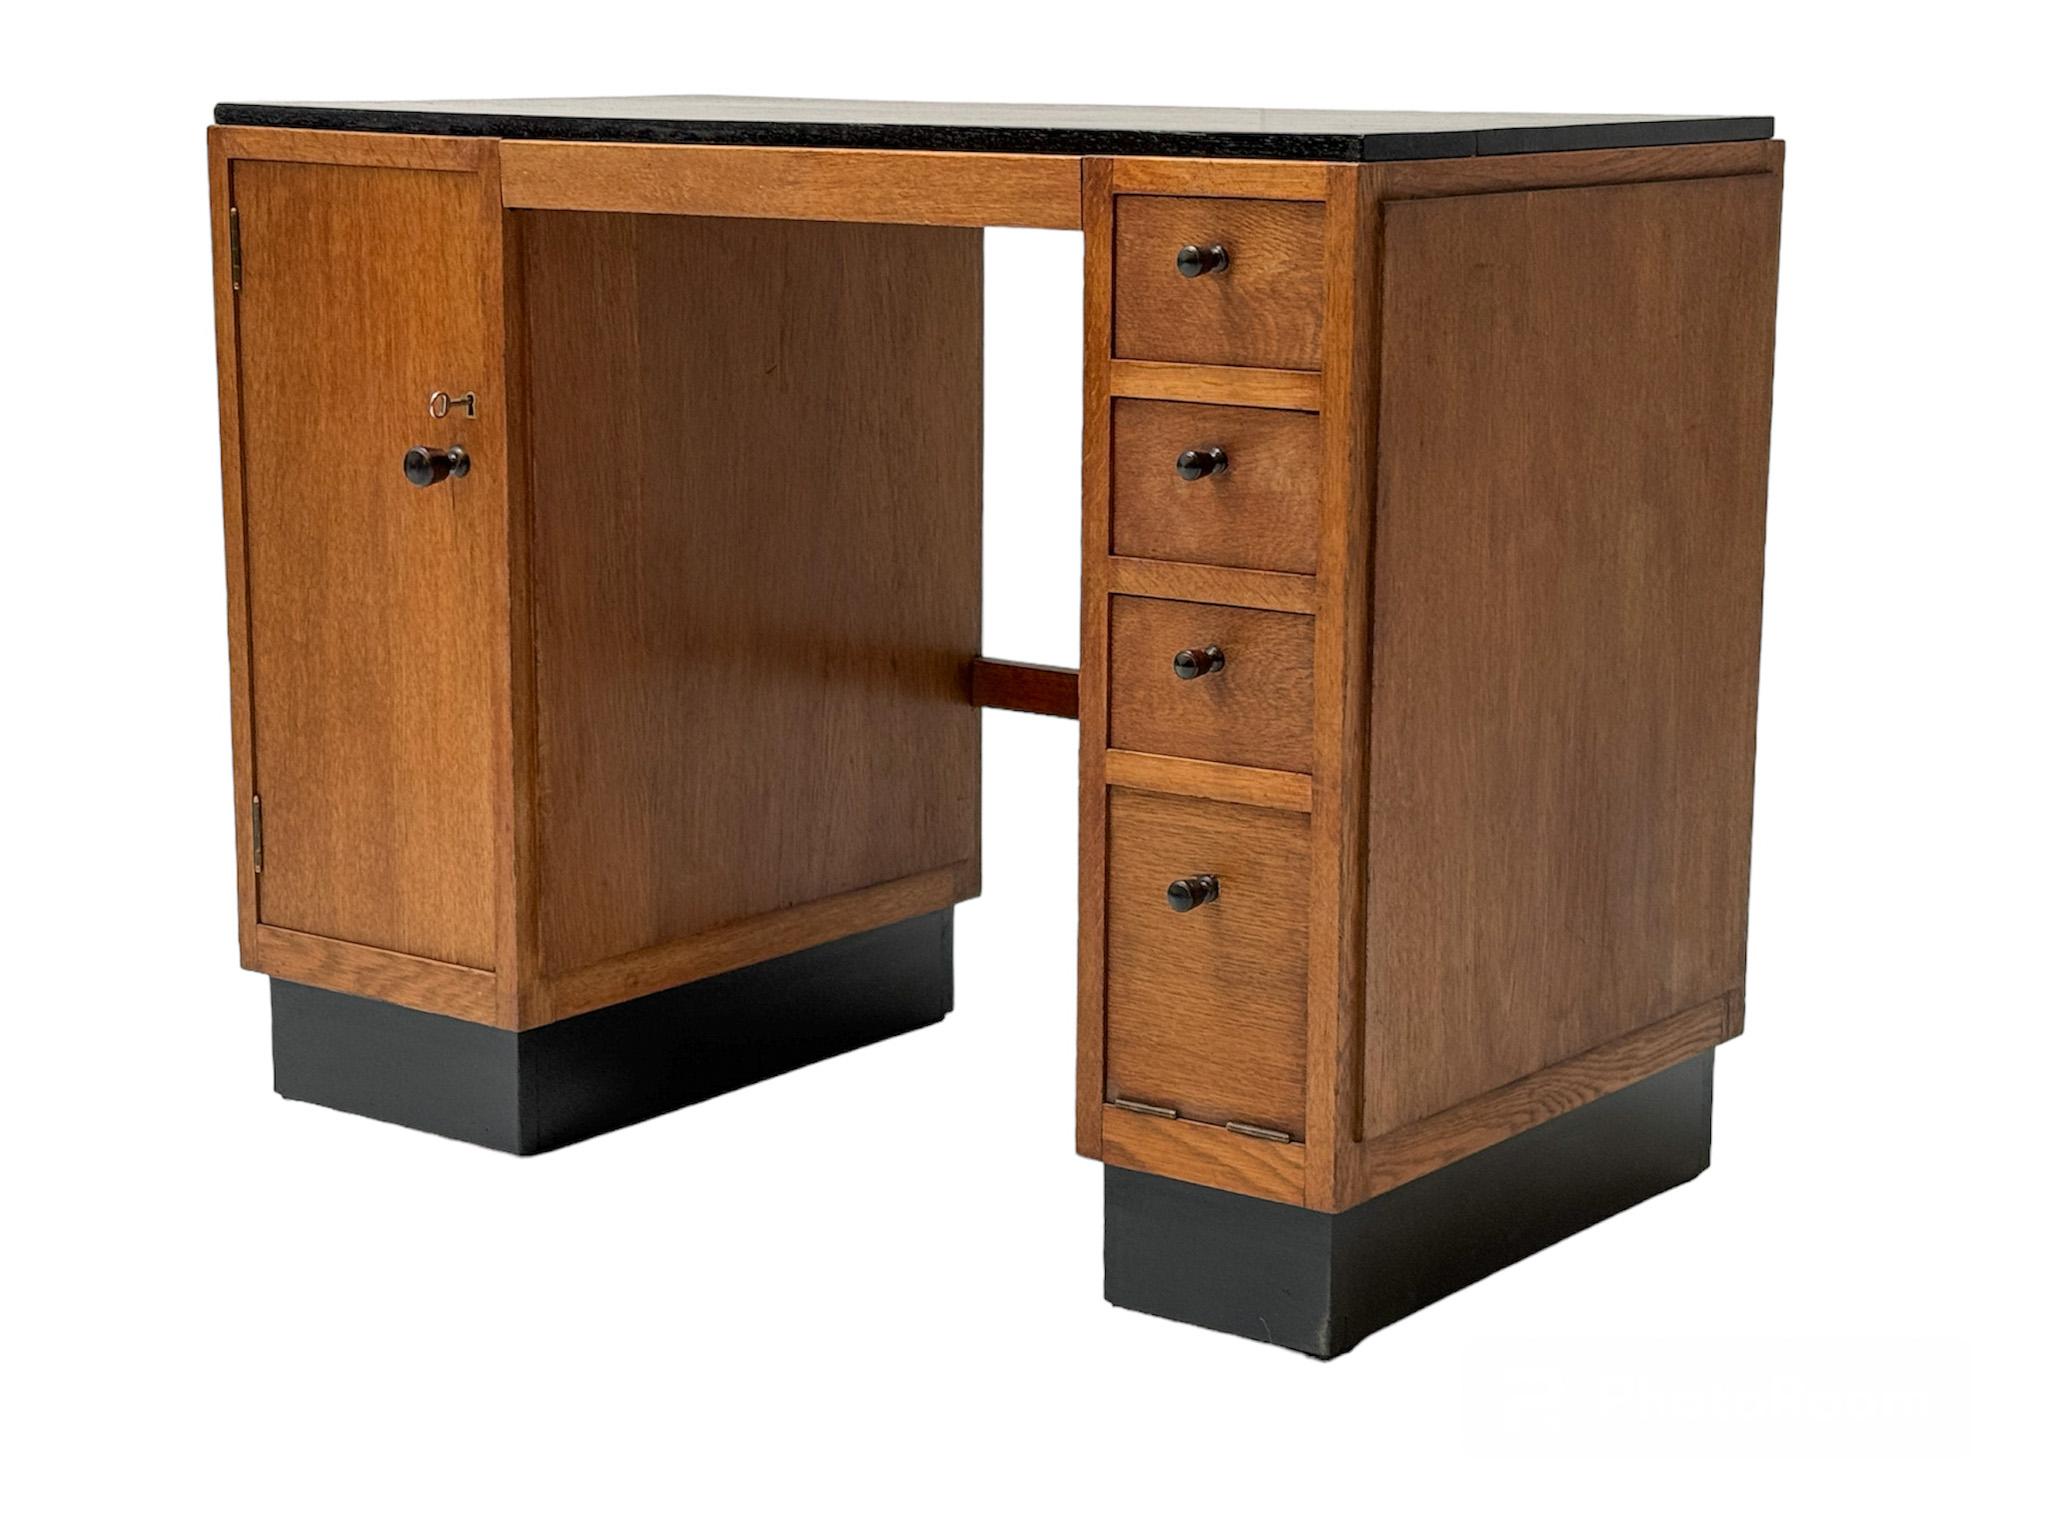 Magnificent and rare Art Deco Modernist desk.
Design by P.E.L. Izeren for De Genneper Molen.
Striking Dutch design from the 1920s.
Solid oak base with original solid macassar ebony knobs on door and drawers.
Original black lacquered solid oak